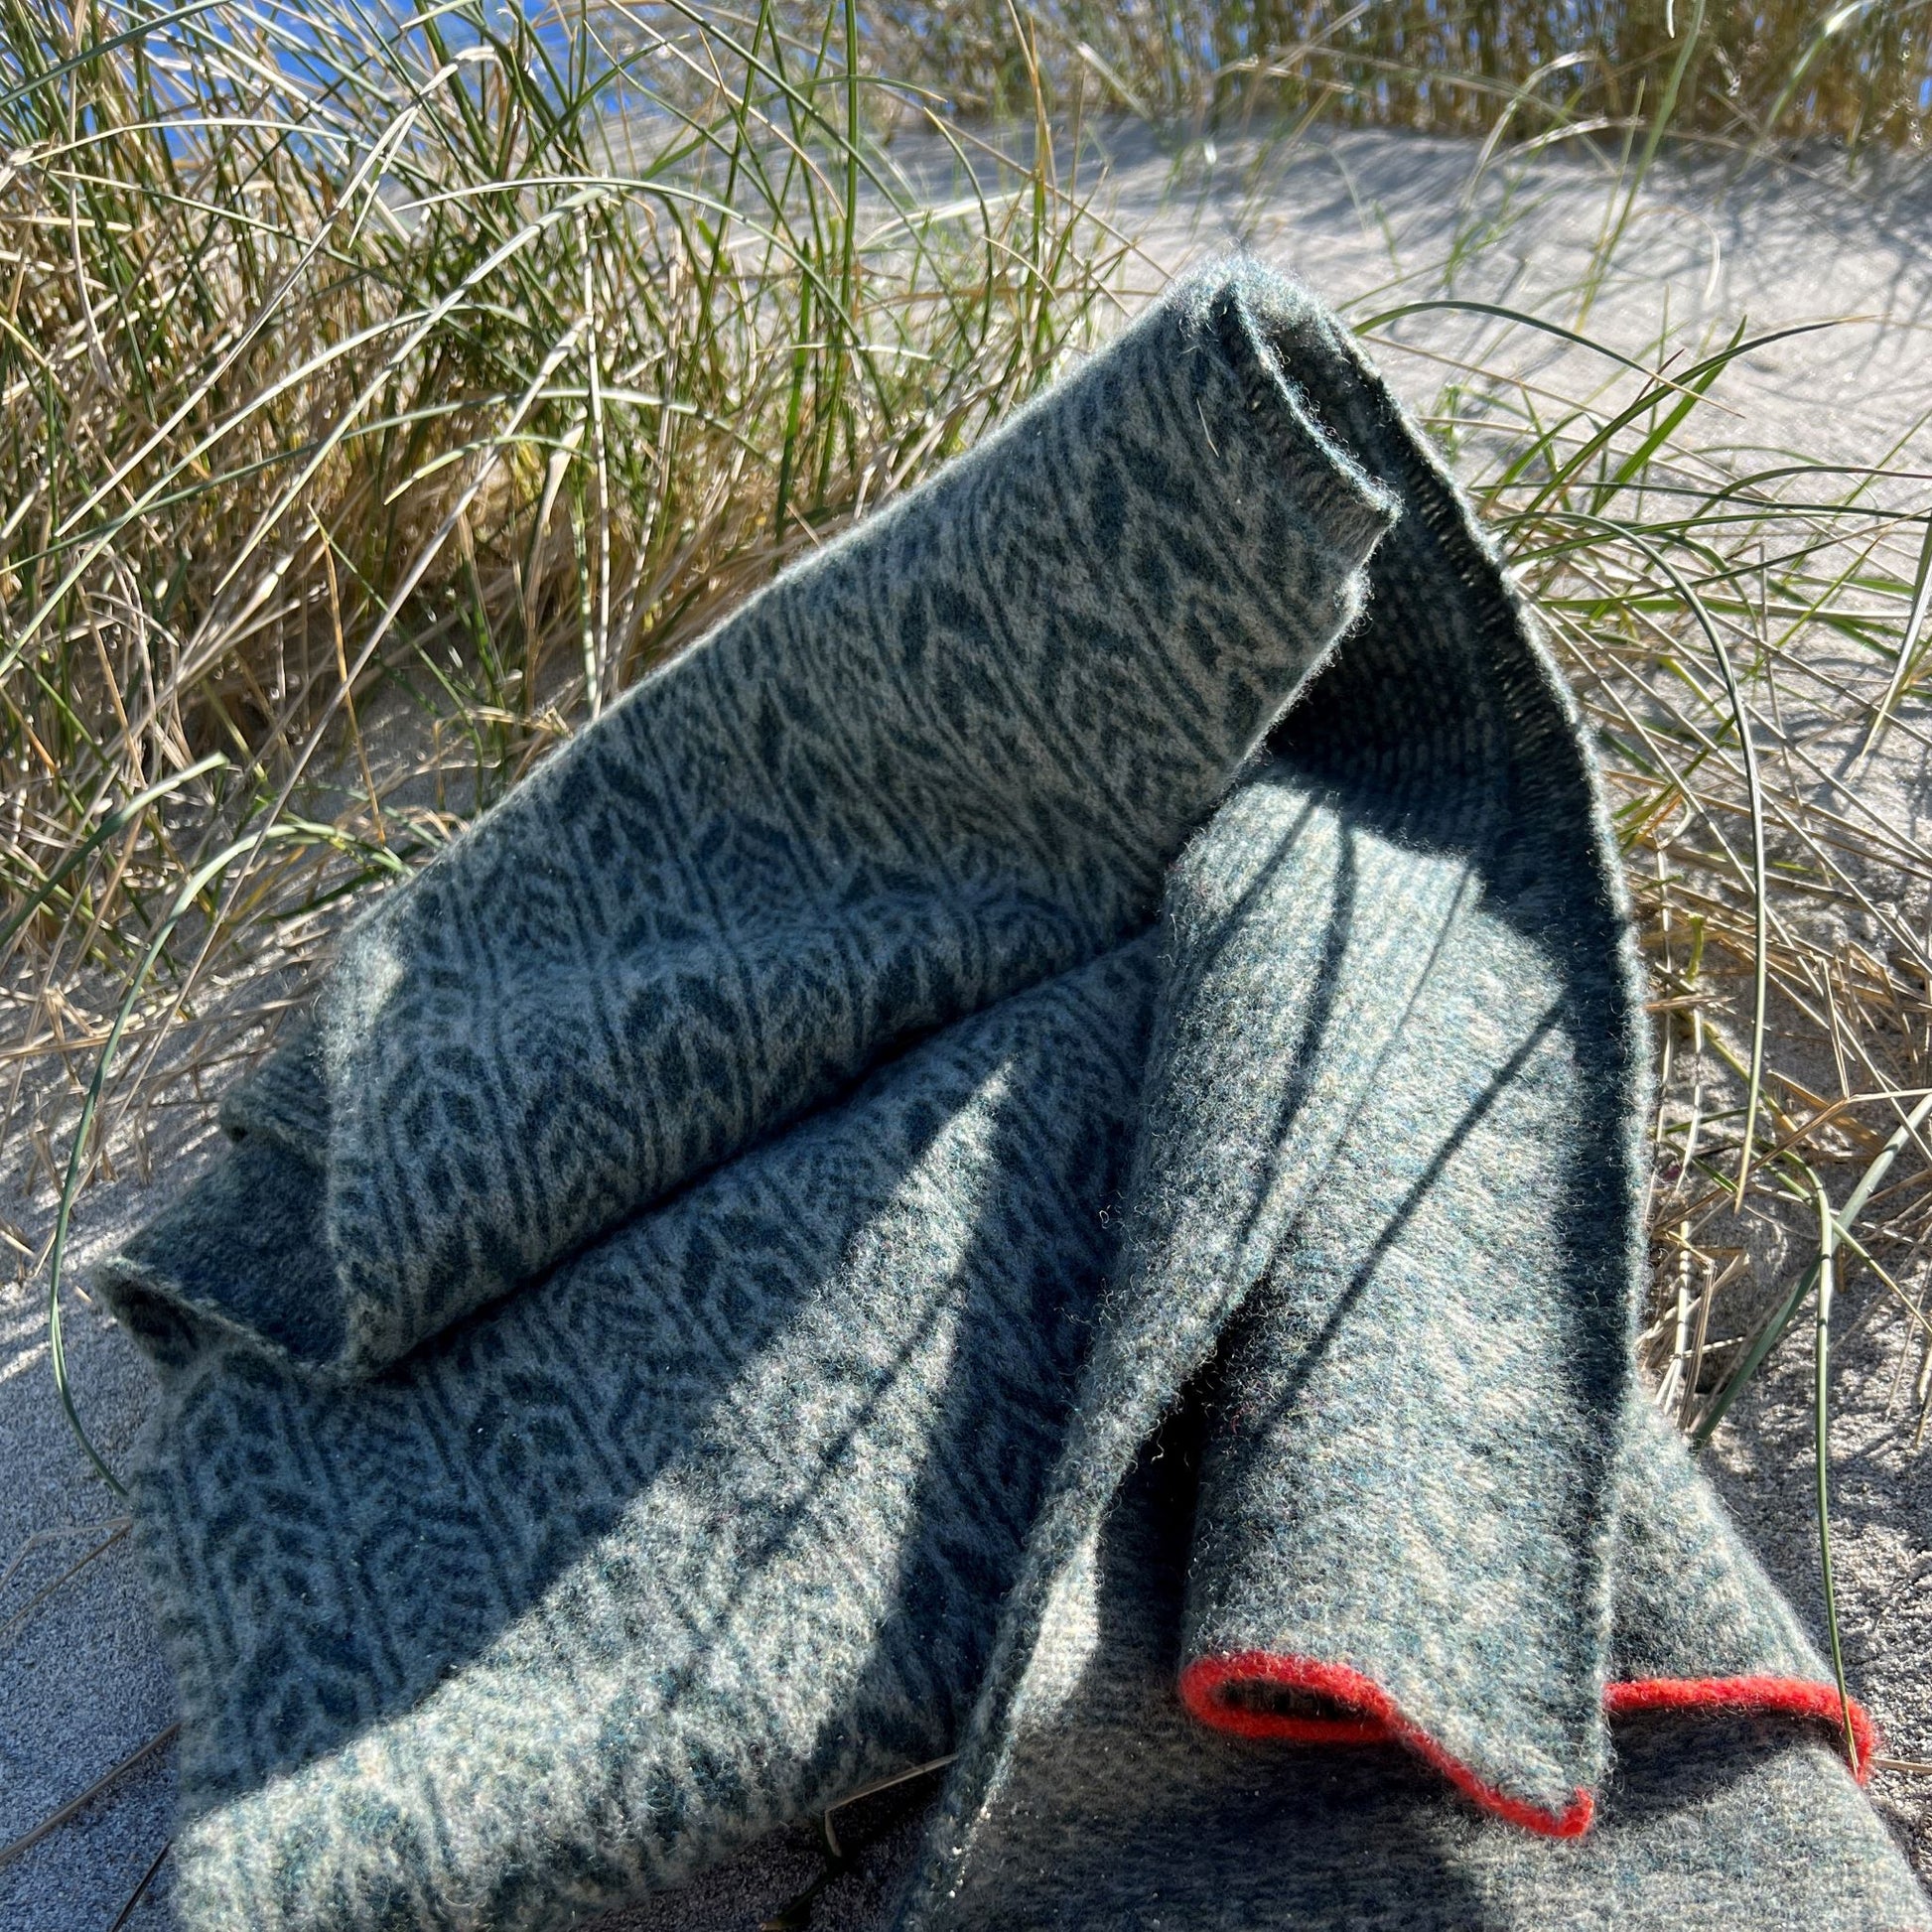 All our scarves are knitted using a punch-card system on a manual vintage knitting machine and are 100% Merino lamb's wool.  Dry clean or wash by hand. Seen here in Moss.